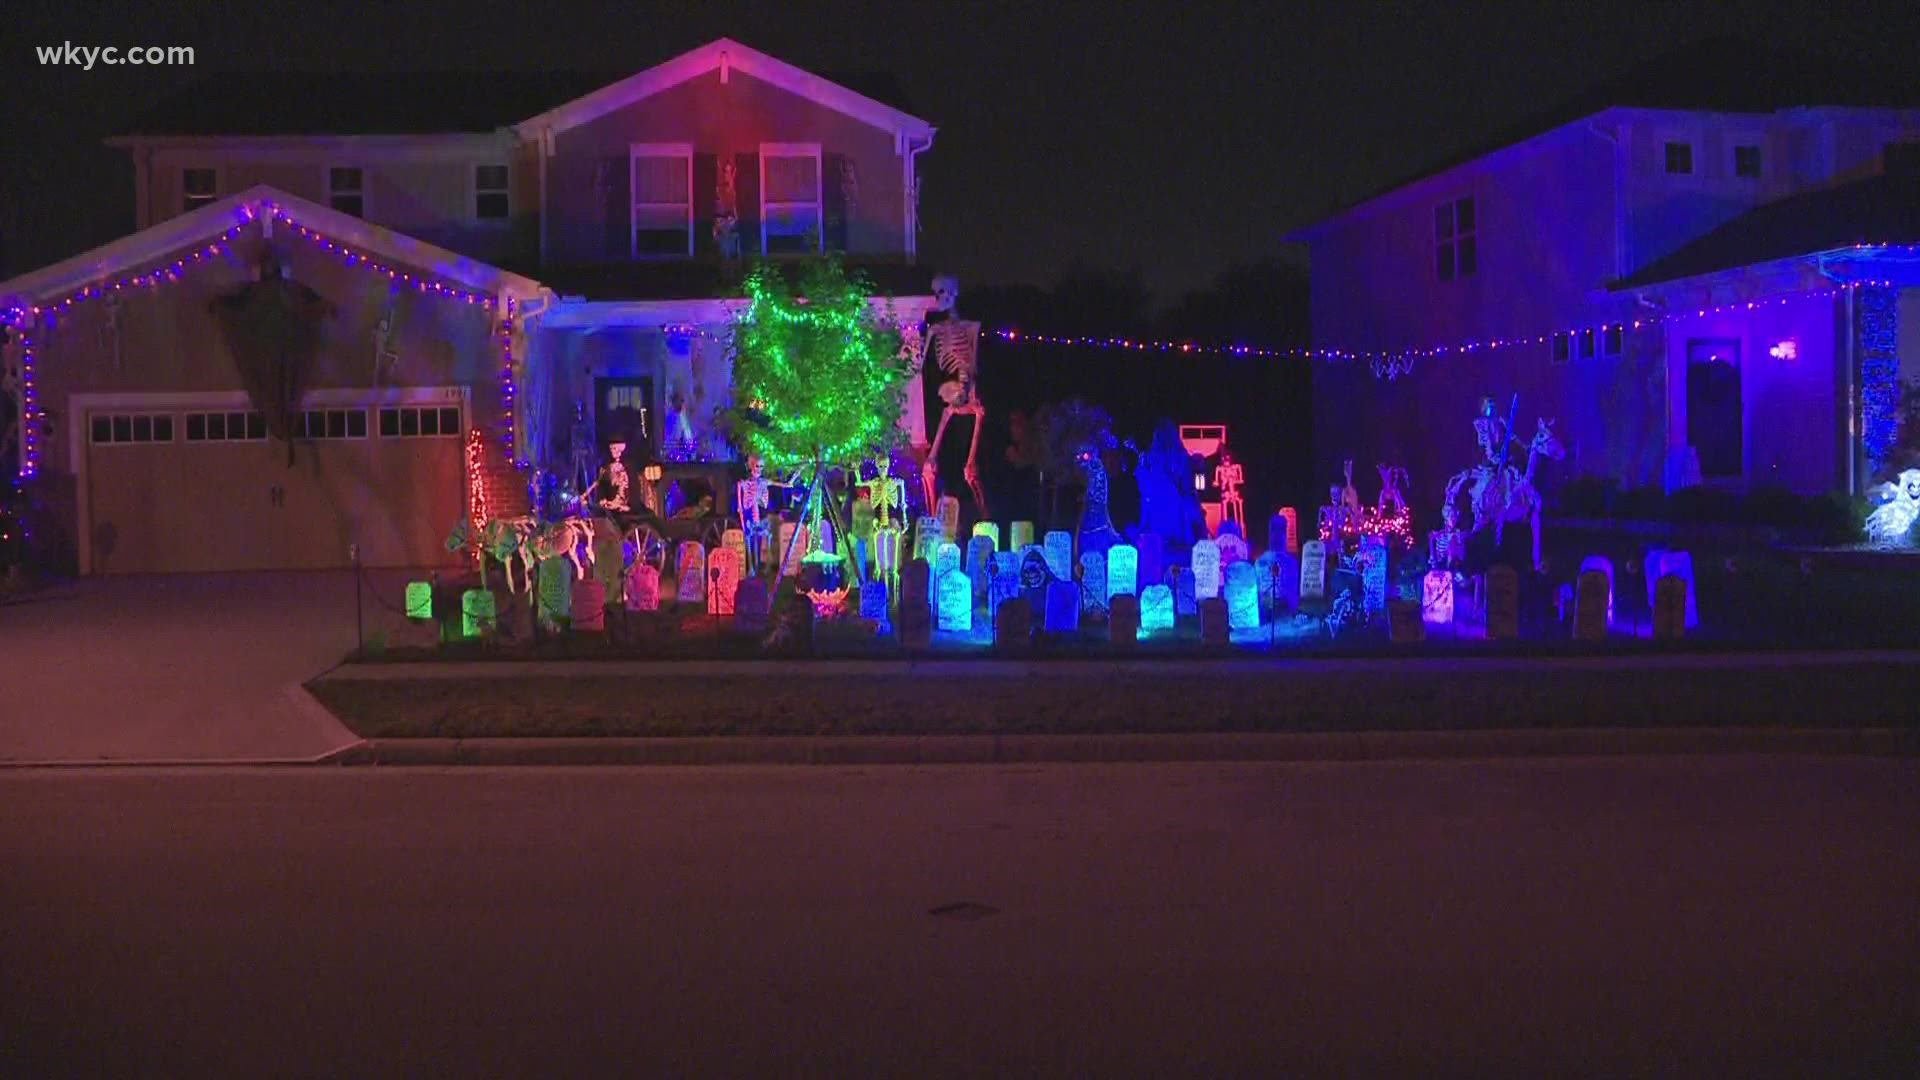 Check this out! Five houses in one Stow neighborhood have decorated for Halloween in epic fashion.